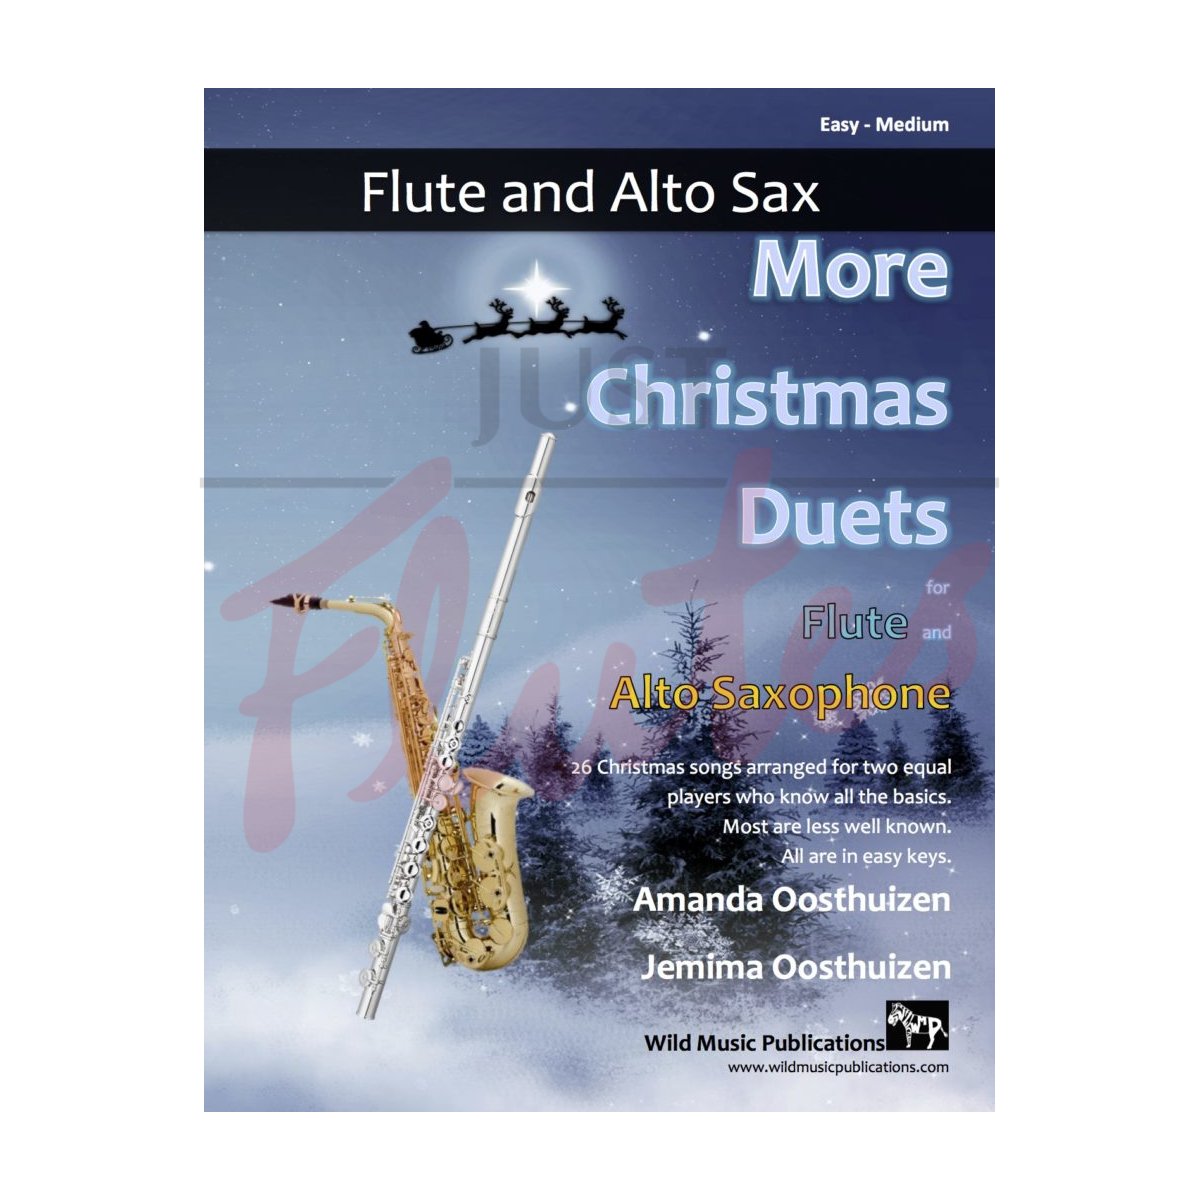 More Christmas Duets for Flute and Alto Saxophone